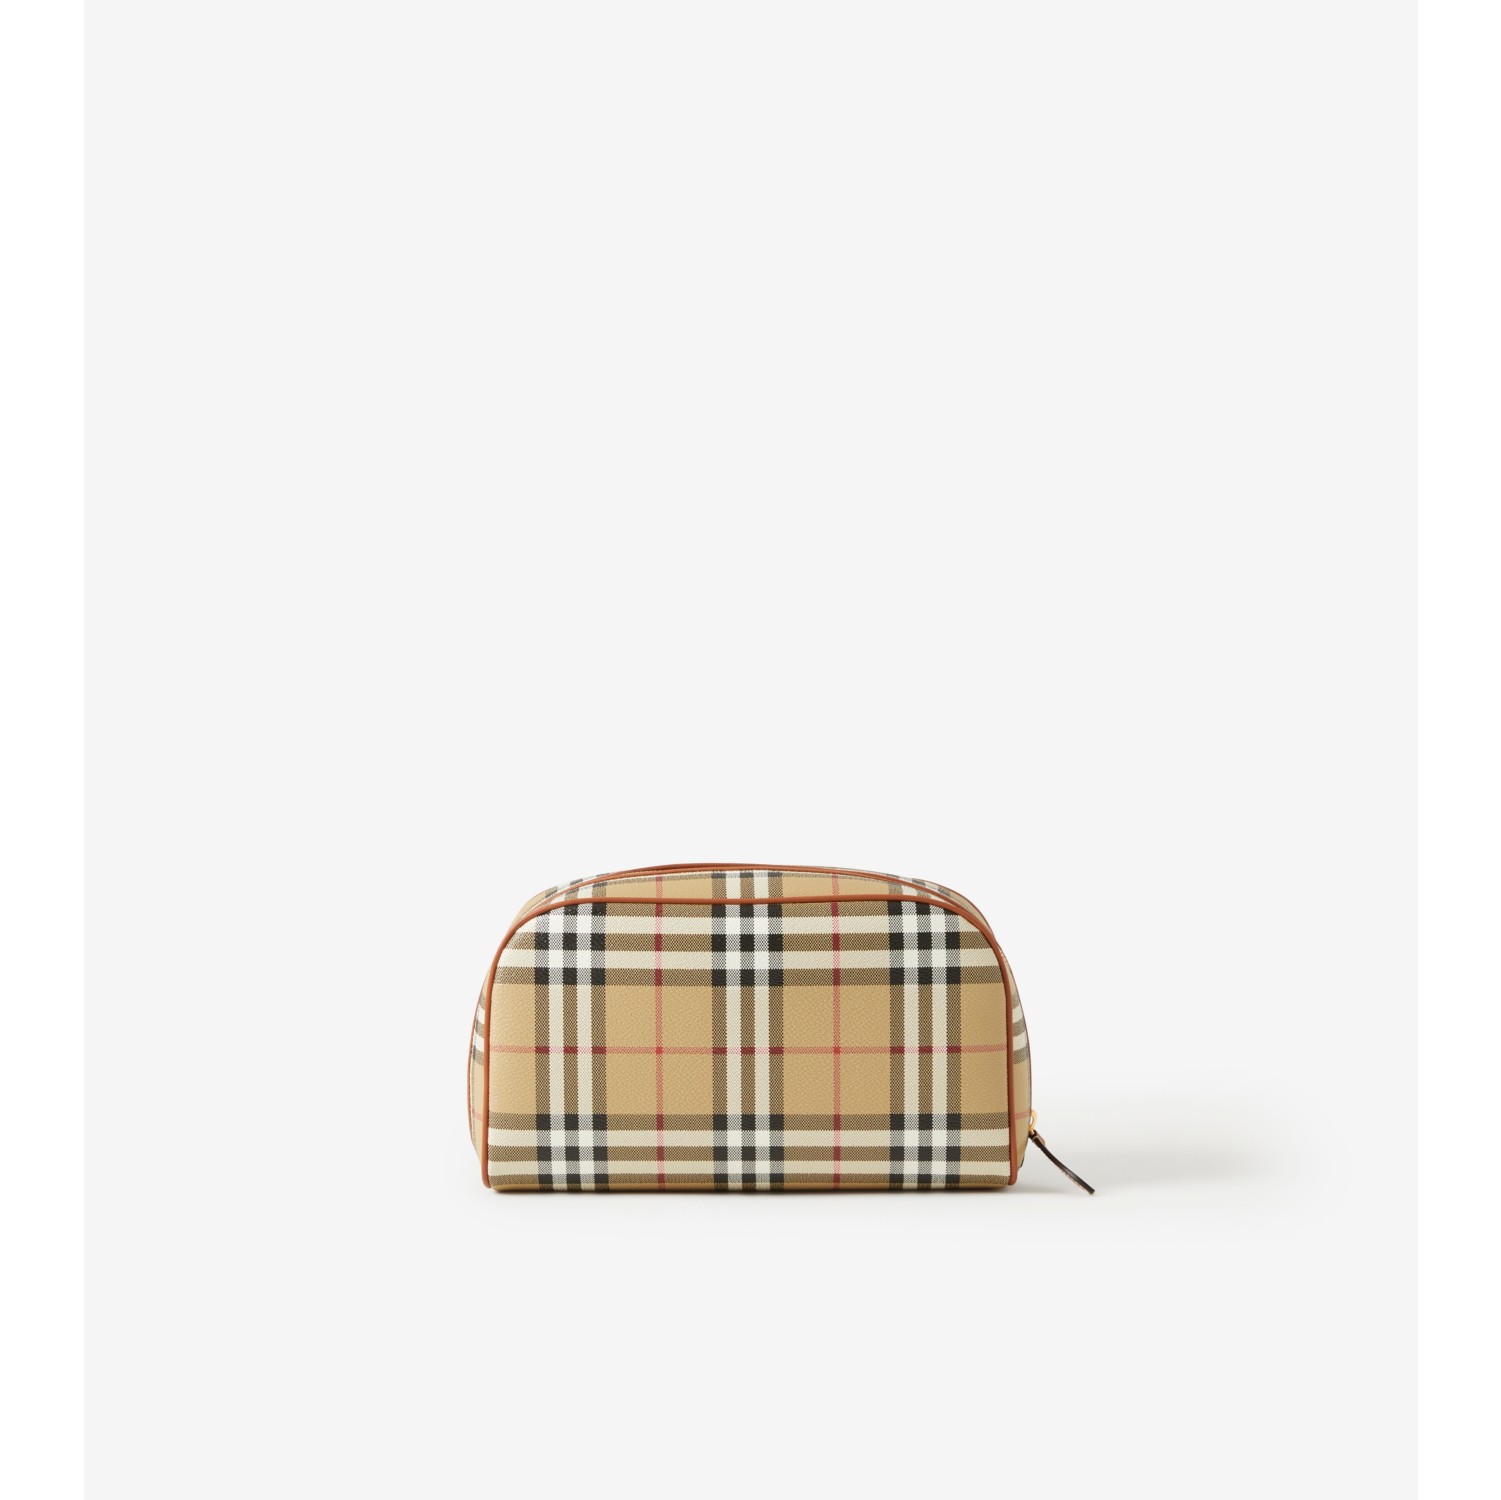 Medium Check Travel Pouch in Archive beige - Women | Burberry 